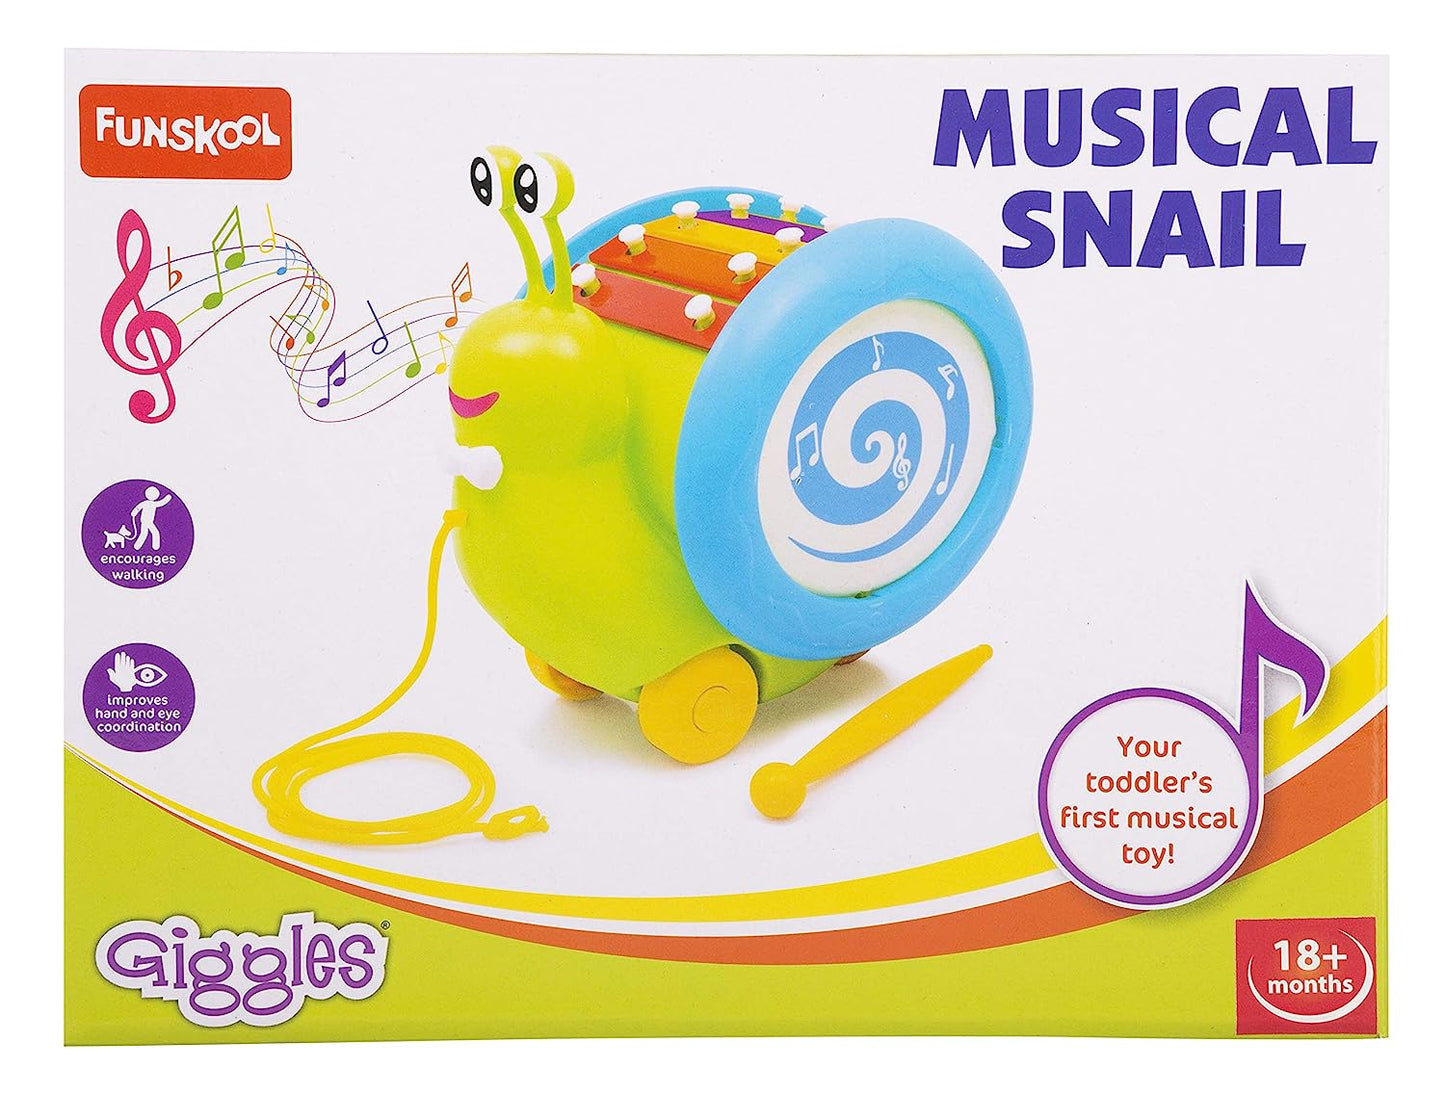 Giggles 3 In 1 Pull Along Musical Snail, Xylophone, Drum And Walking Preschool Toy | Age :  1 Years + by Funskool